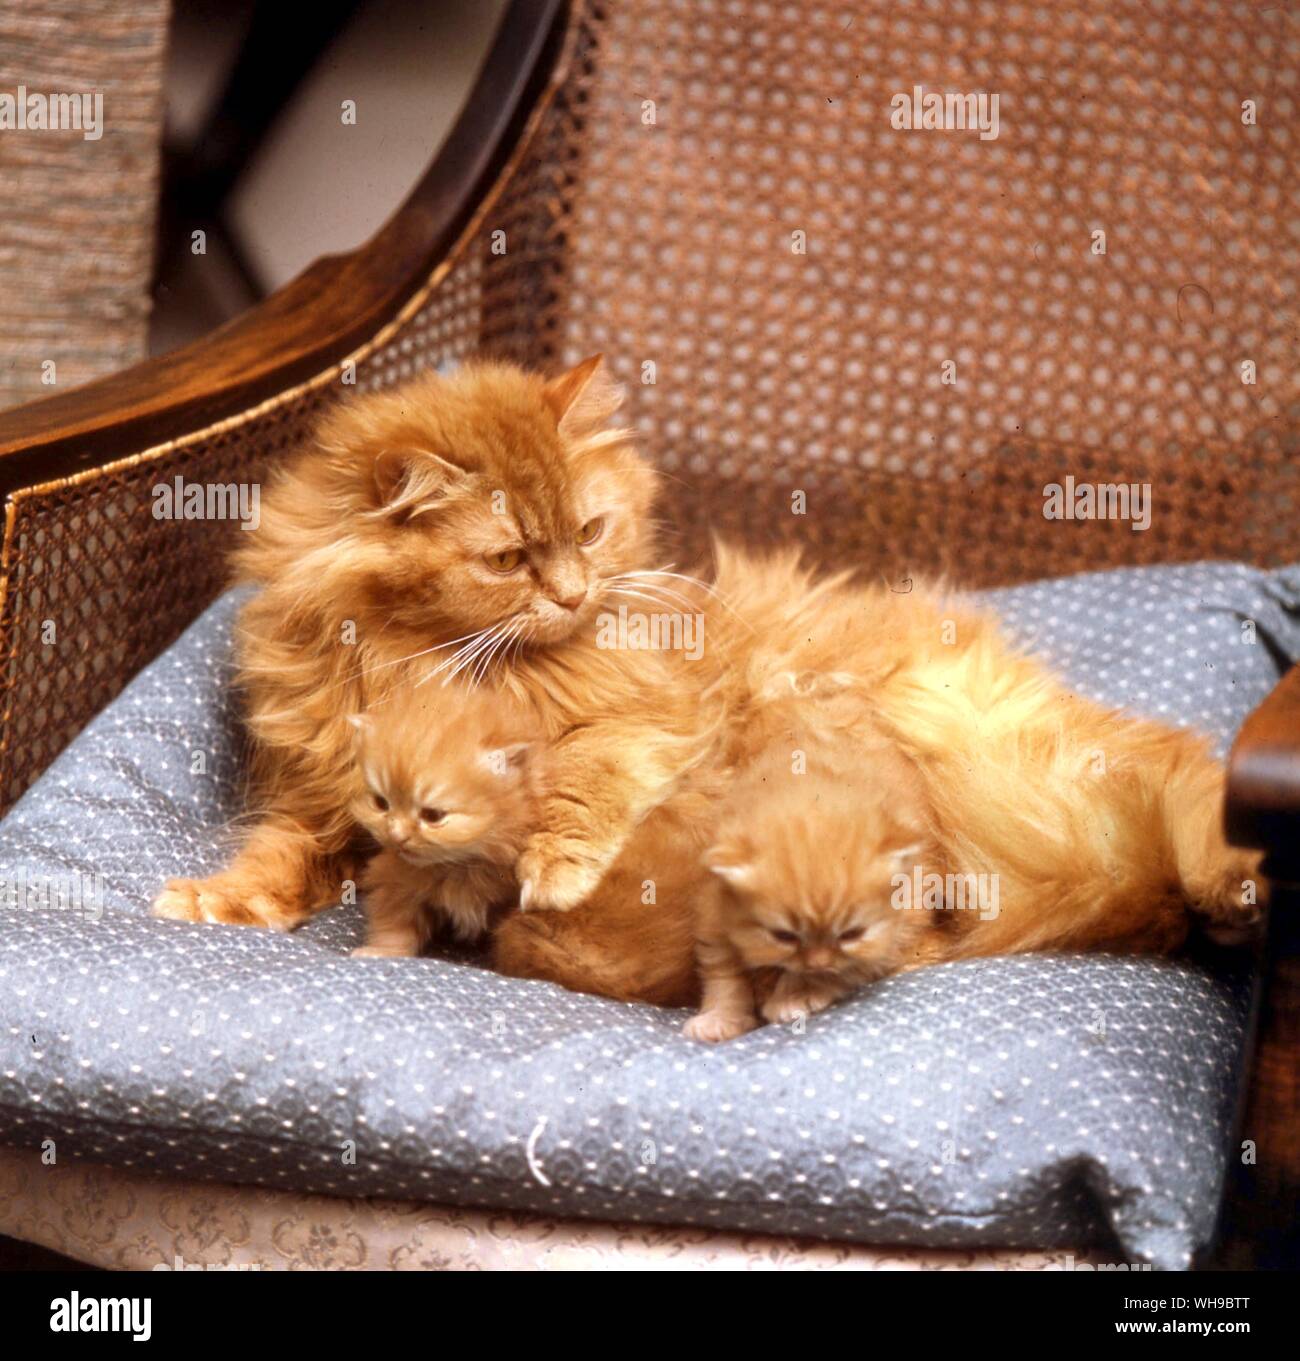 Red Tabby Cat and Kittens Stock Photo